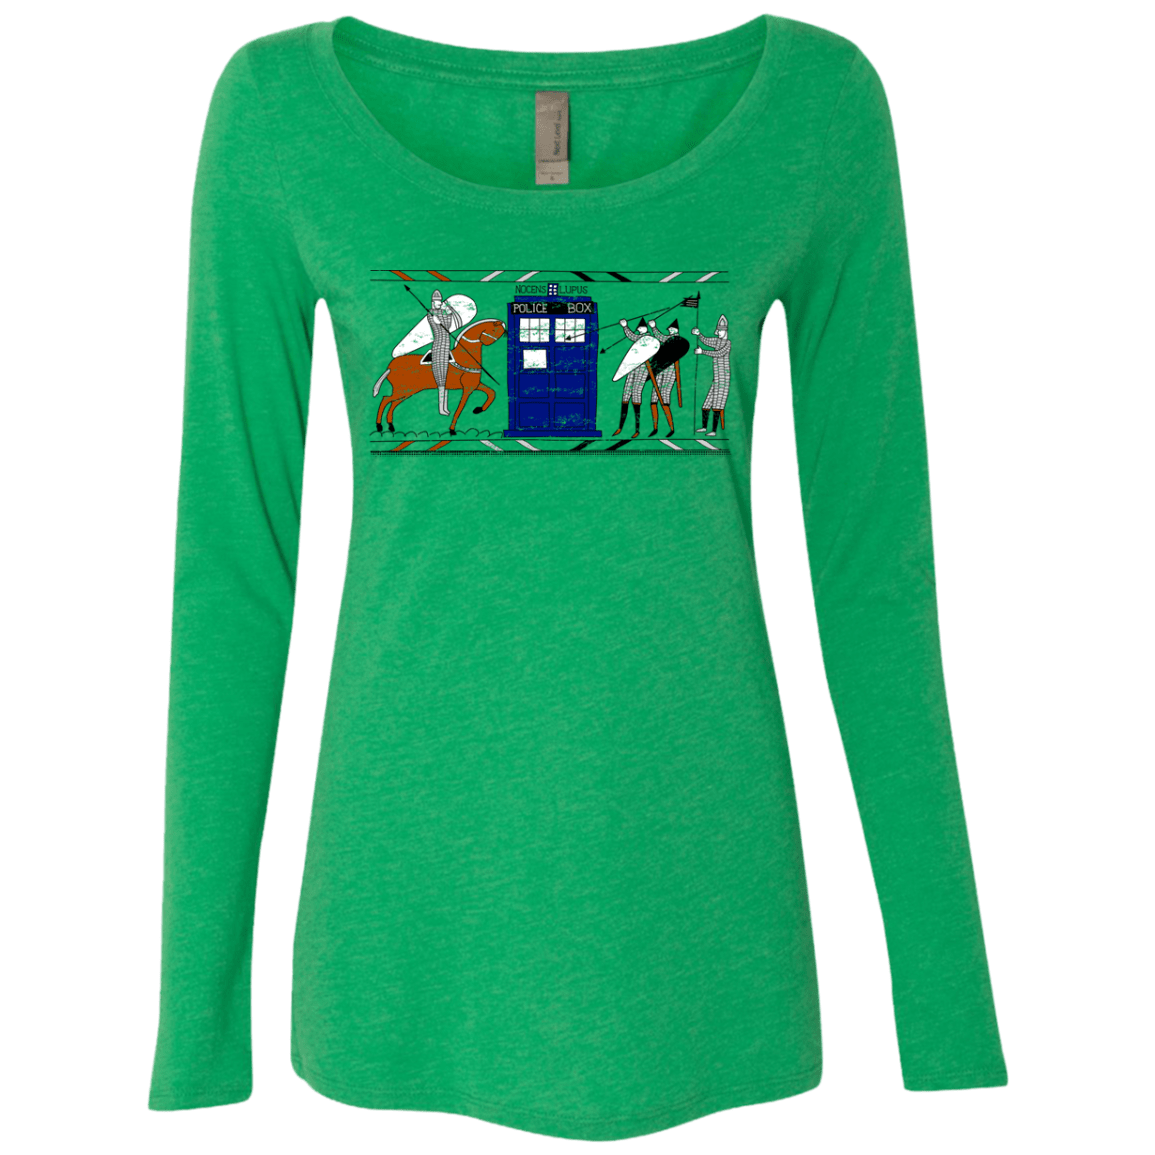 T-Shirts Envy / S Nocens Lupus Tardis in the Bayeux Tapestry Women's Triblend Long Sleeve Shirt